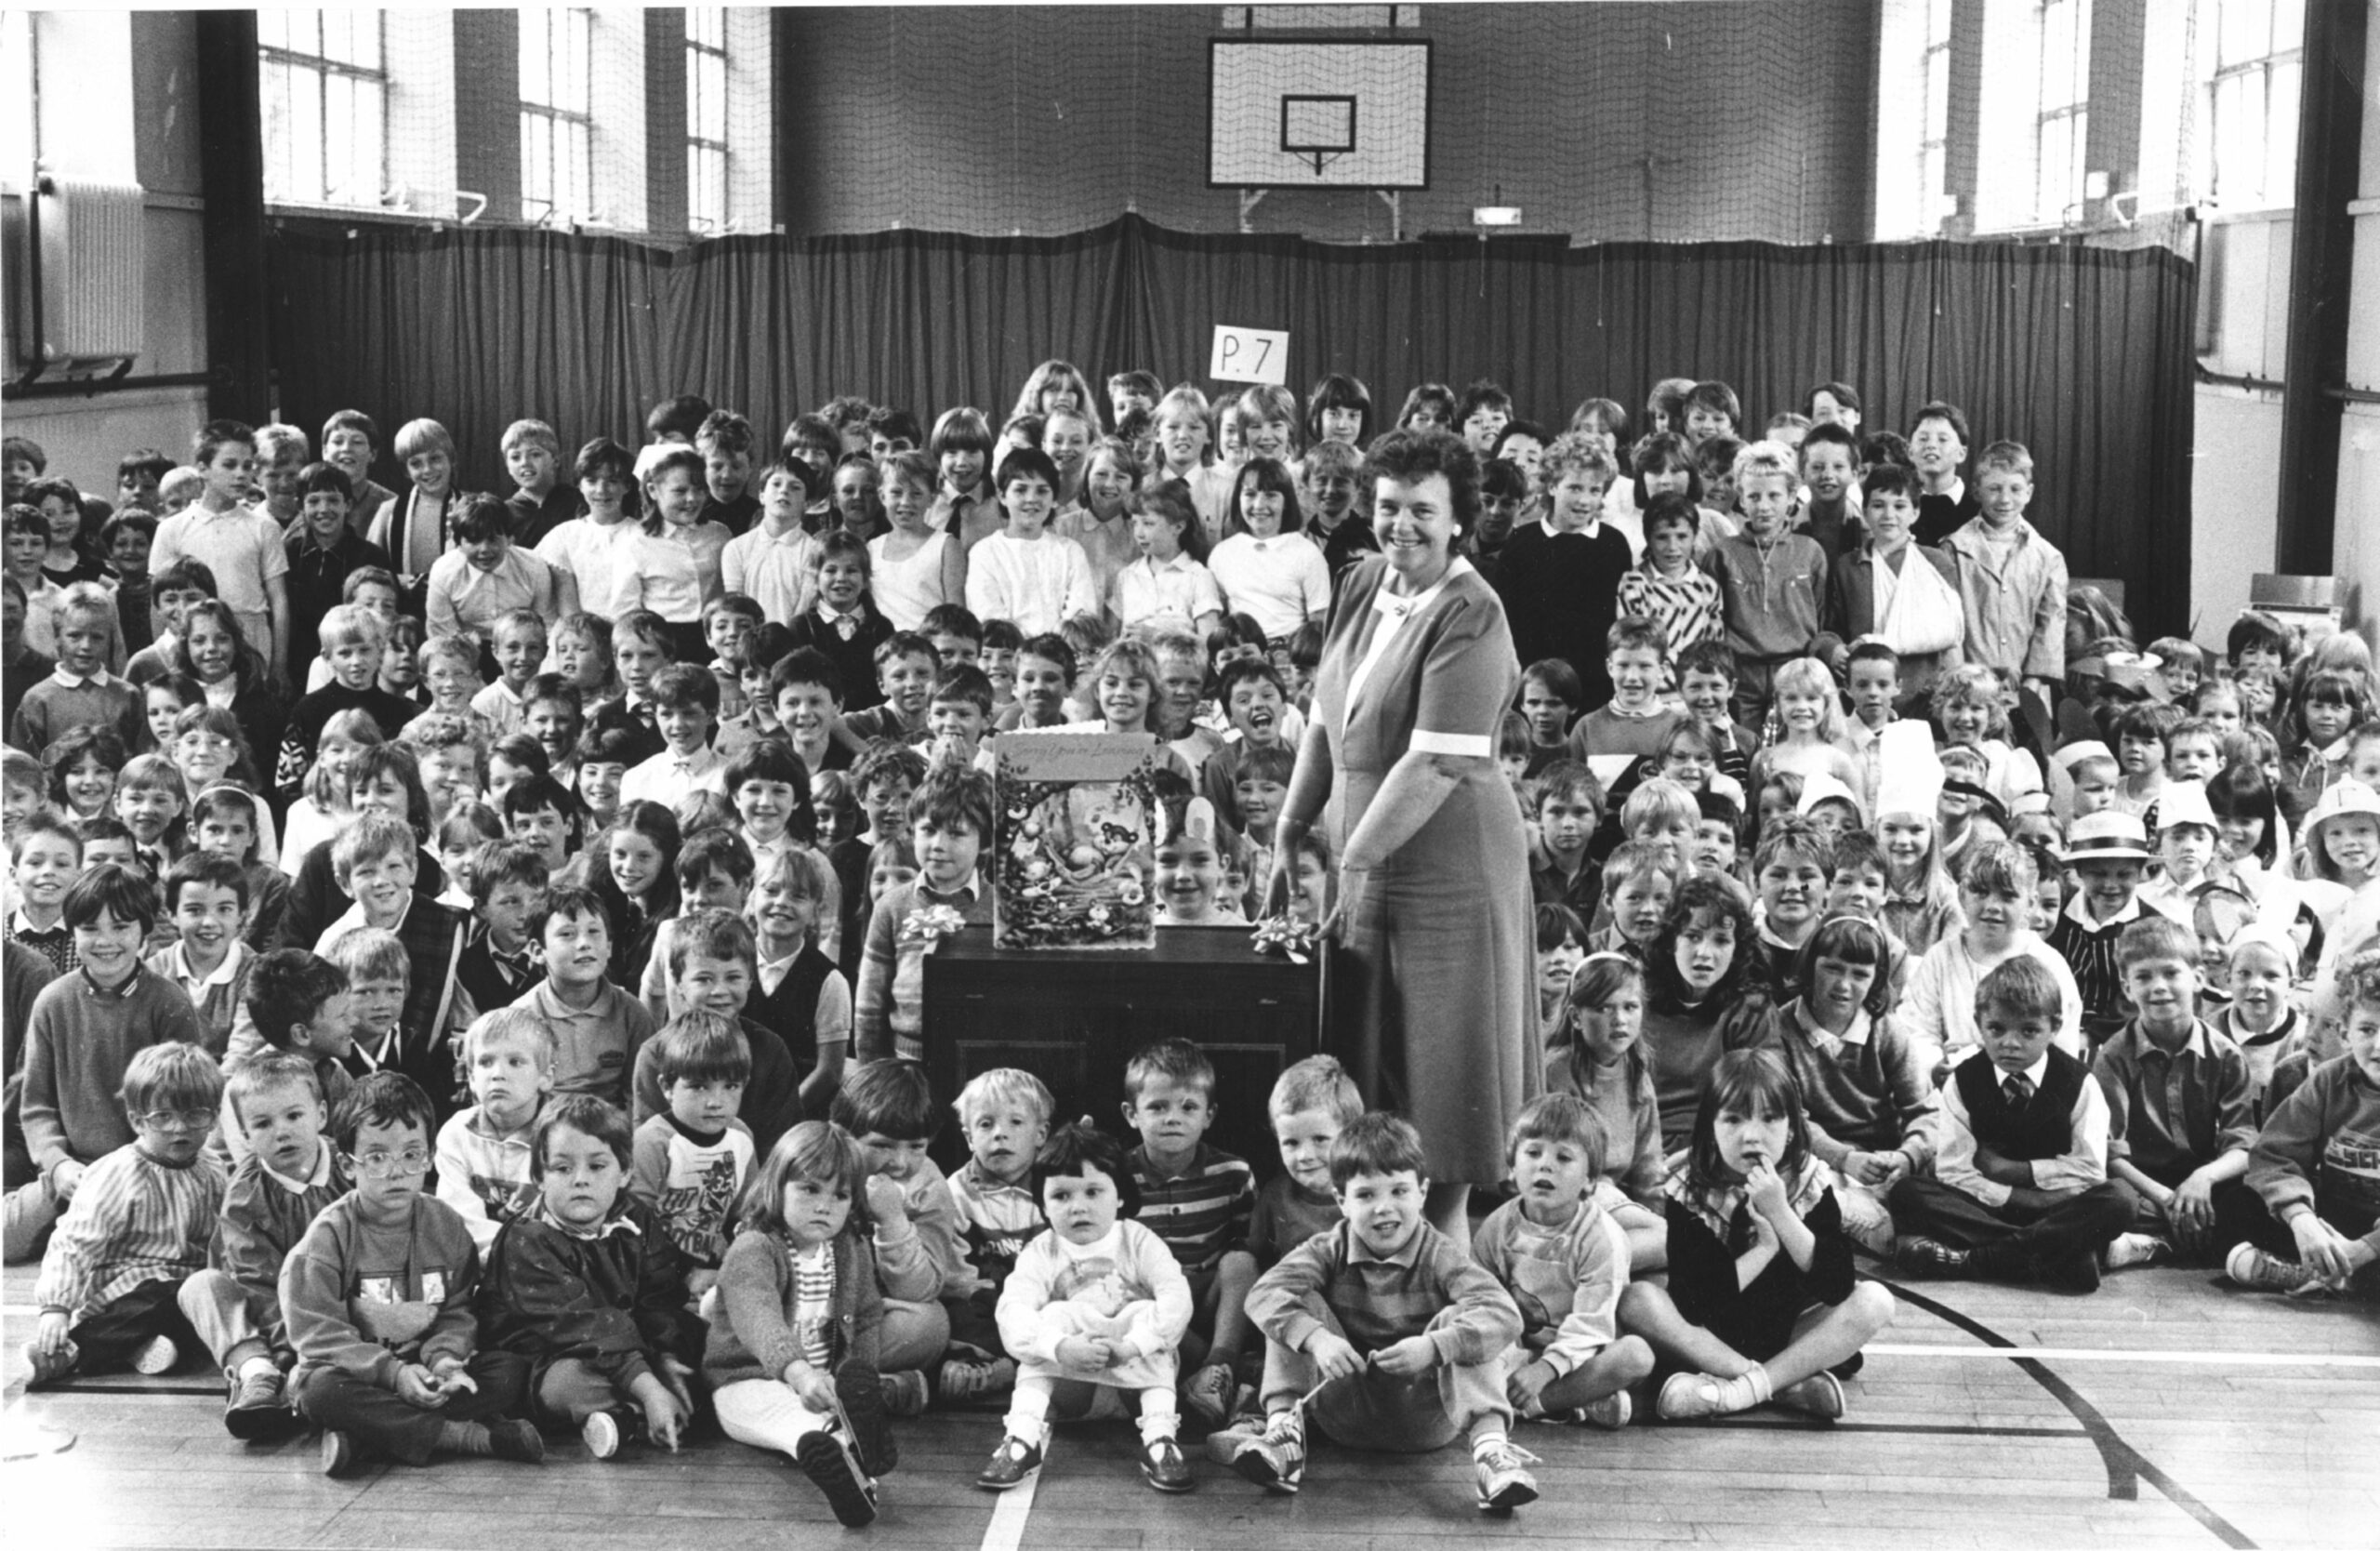 Walker Road Primary School head teacher Jean Williams with the hostess trolley presented to her at a retirement ceremony in the school in 1988.